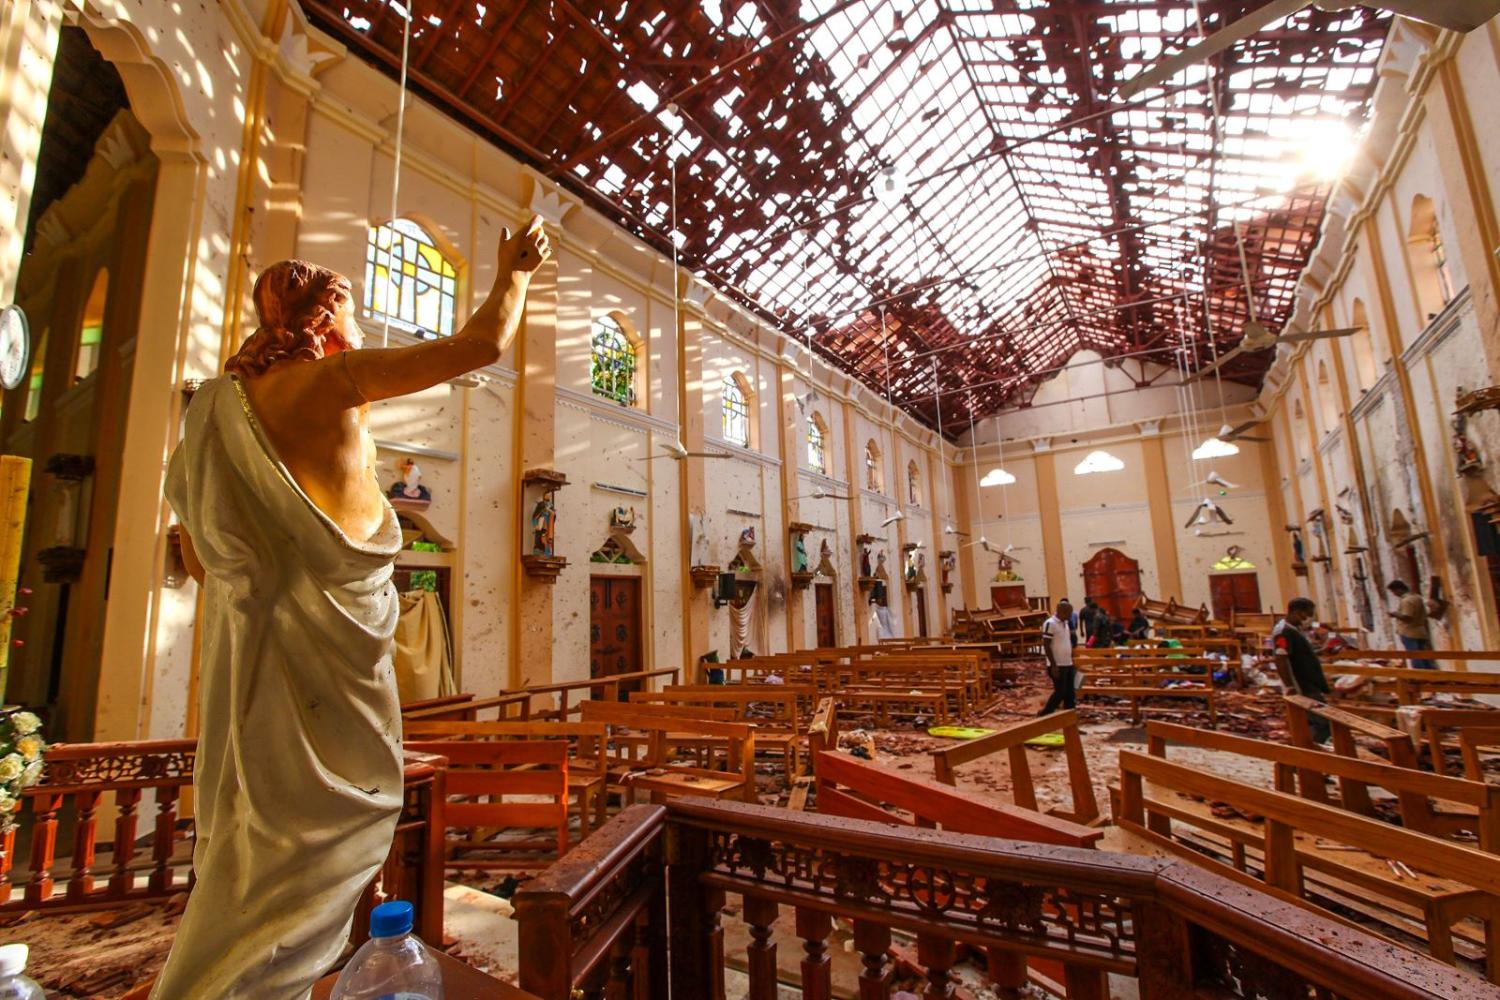 Officials inspect the damaged St. Sebastian's Church after co-ordinated explosions on April 21, 2019 in Negombo, north of Colombo, Sri Lanka. (Photo: Stringer/Getty)